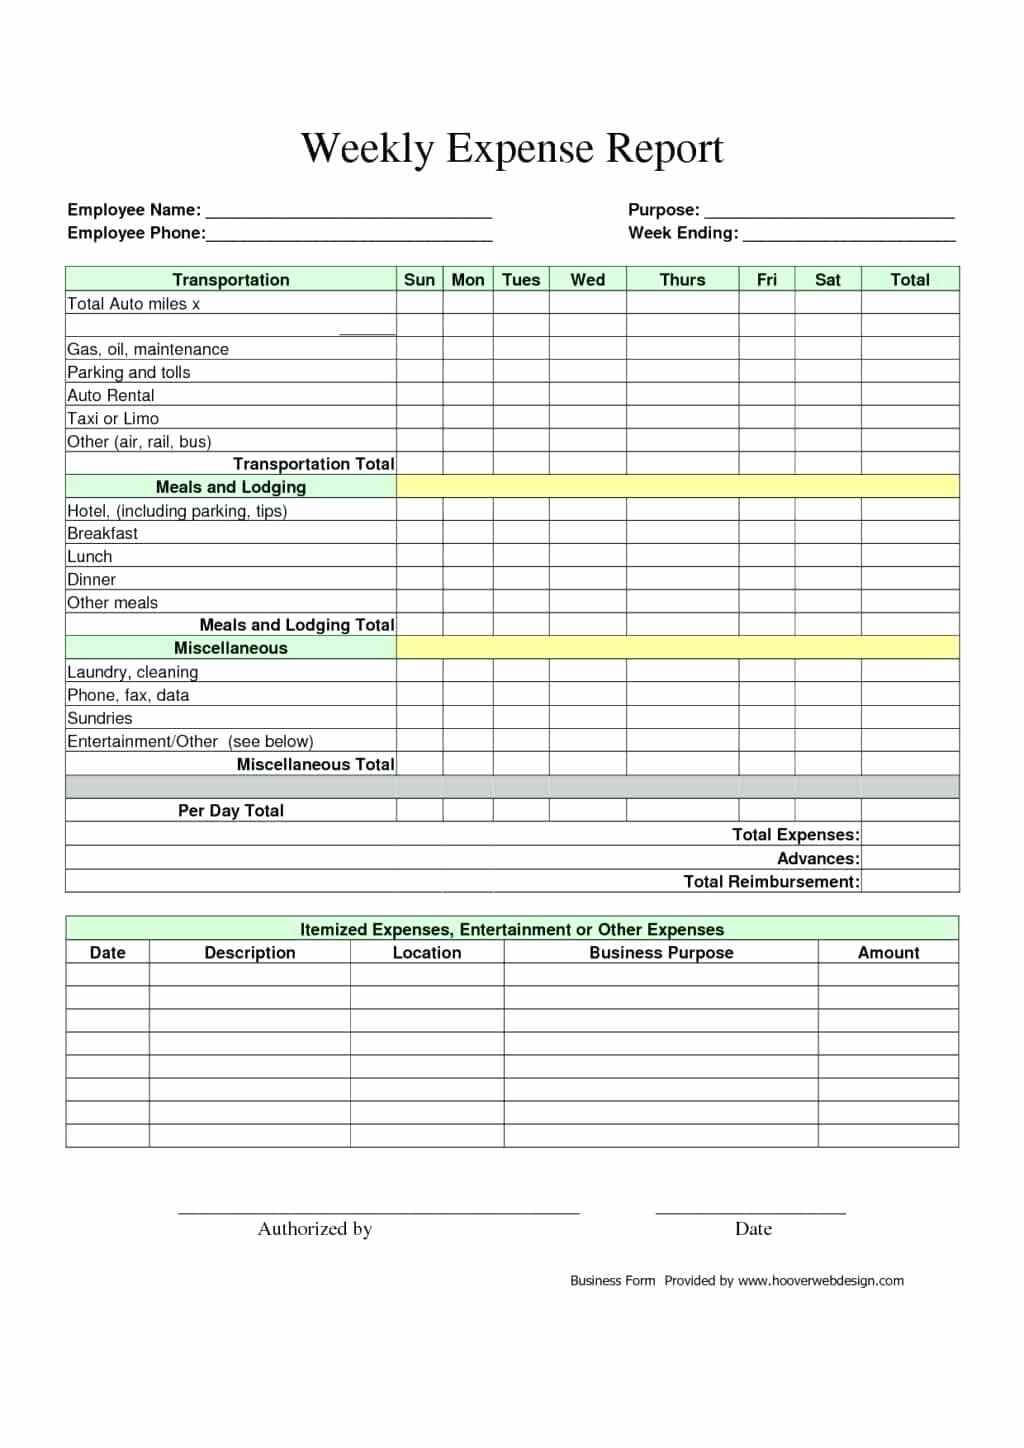 024 Word Expense Report Template Ideas Event Mileage Free With Gas Mileage Expense Report Template